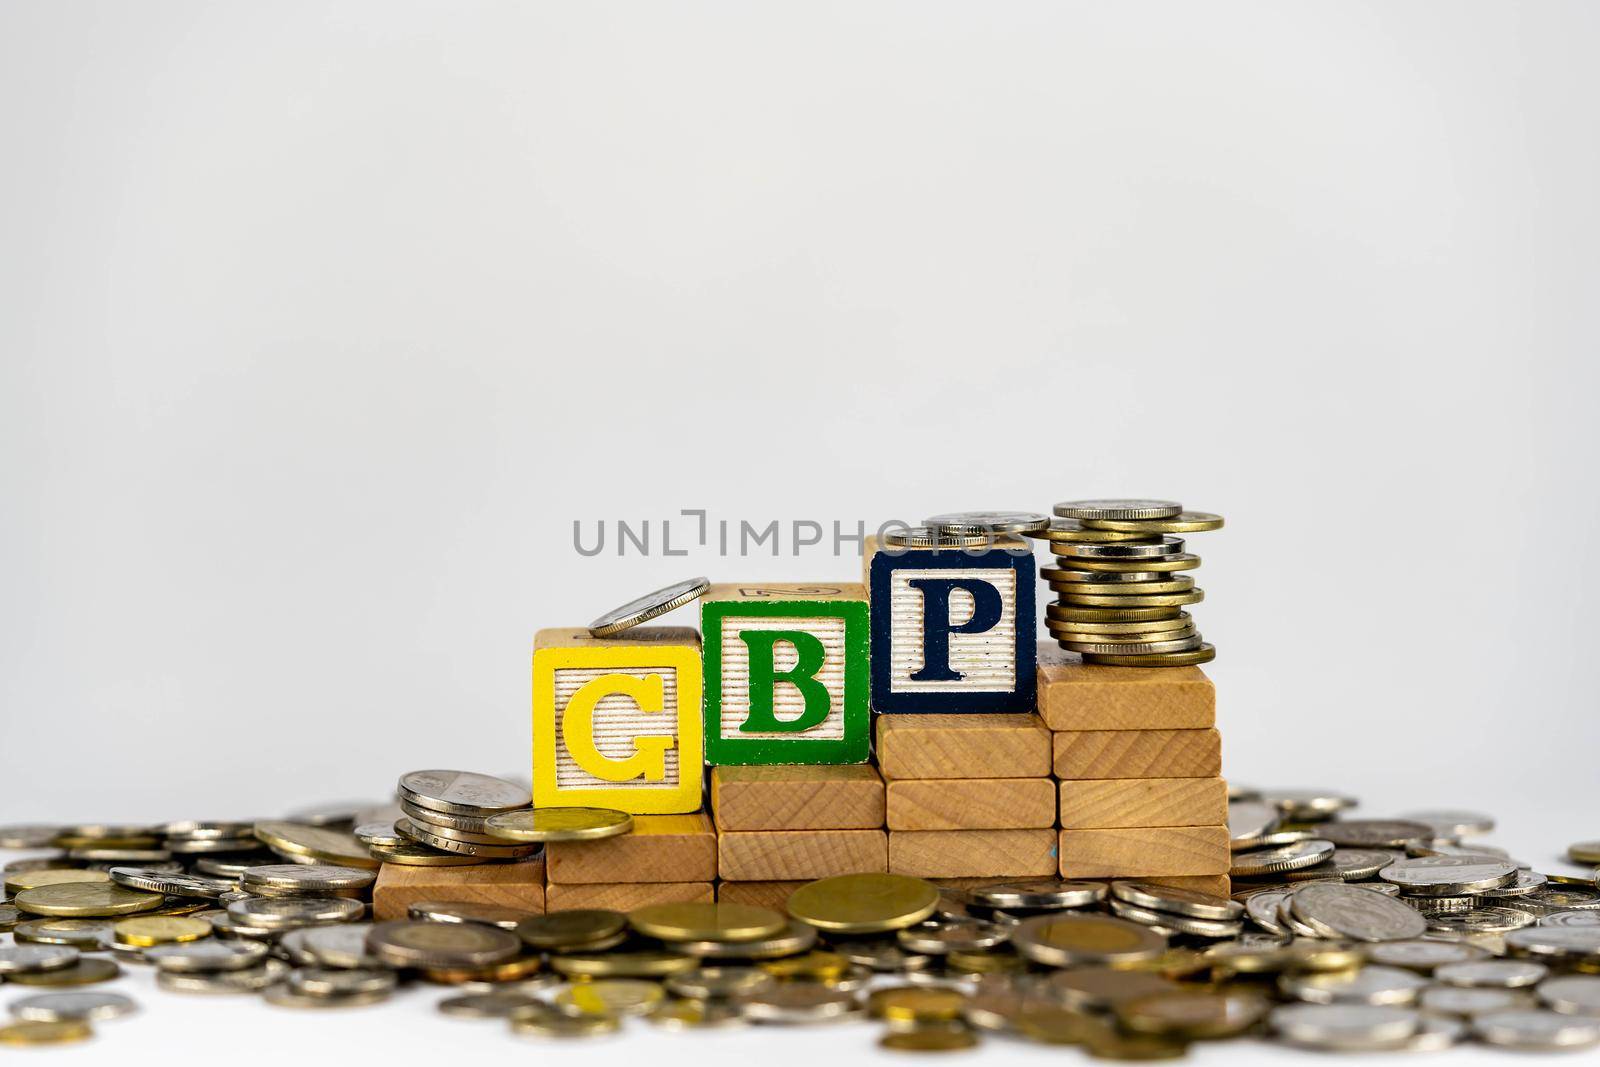 Forex GBP concept with wooden blocks and coins. Forx GBP letters on wooden blocks sorrounded with money by billroque